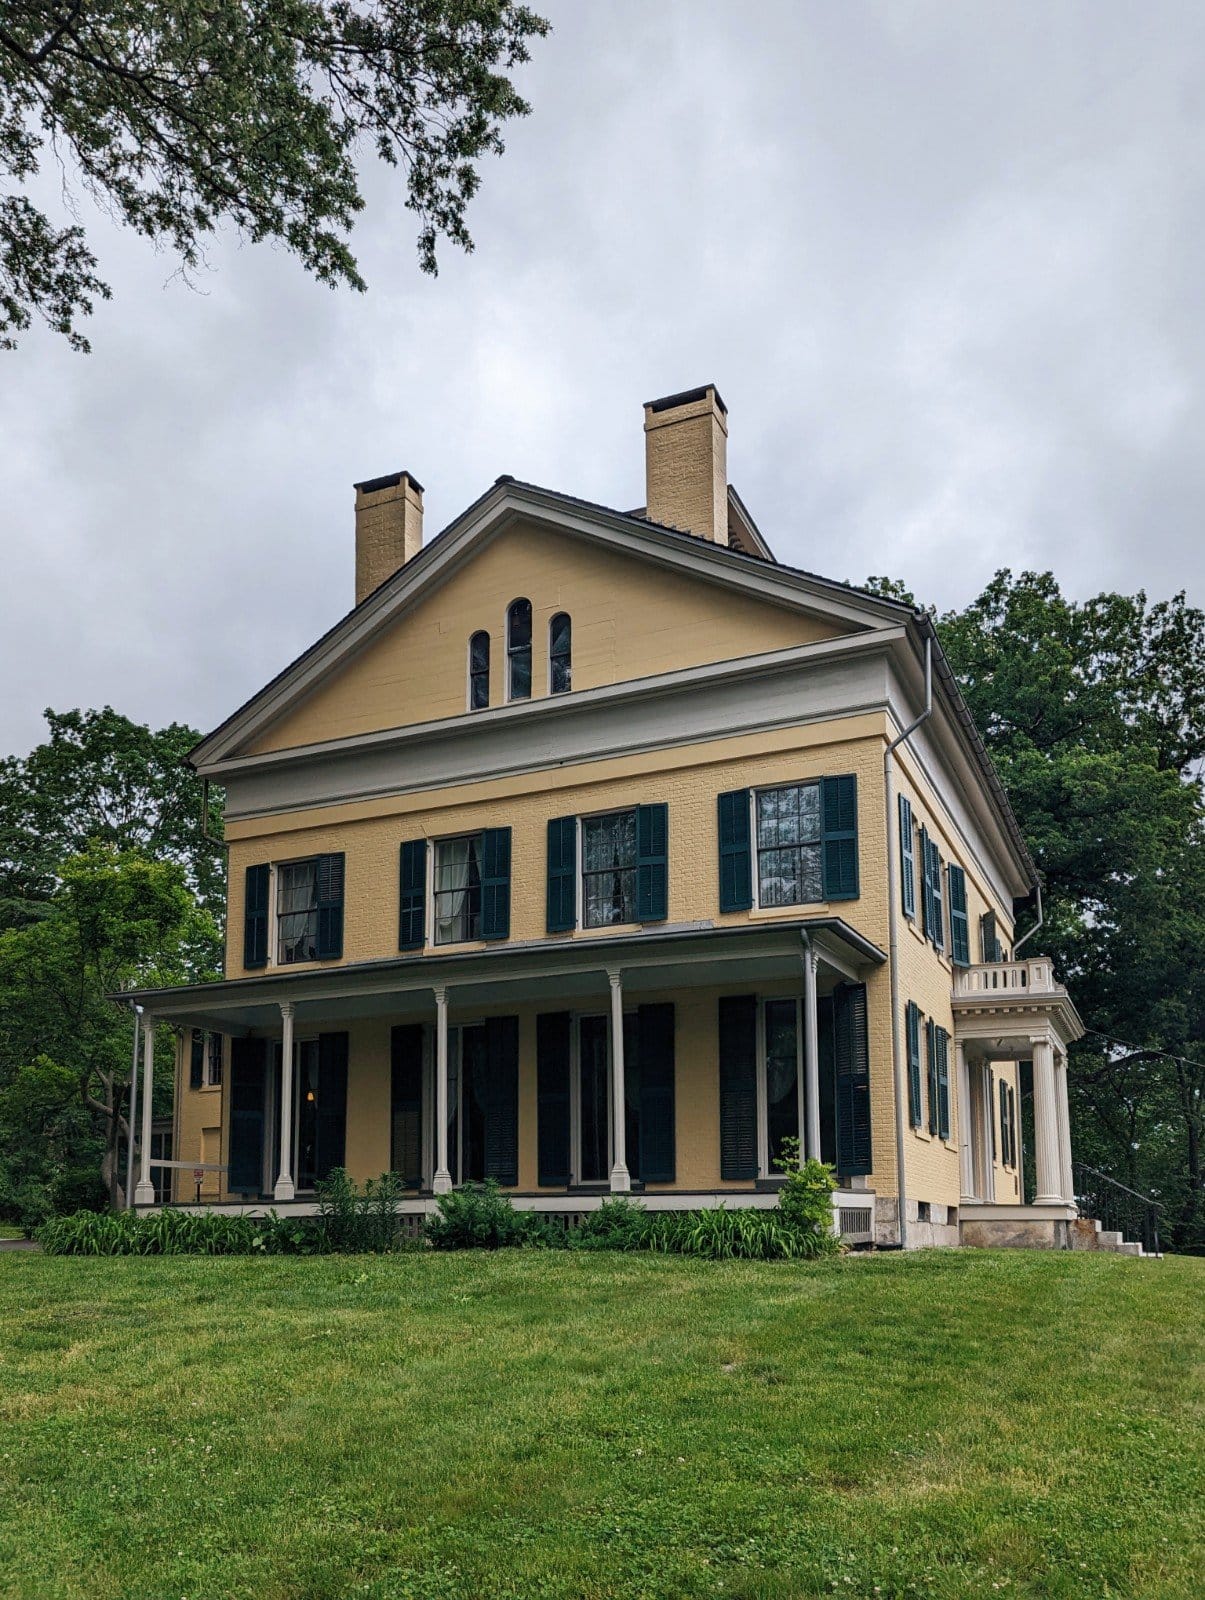 Exterior of the Emily Dickinson Museum - a yellow house with dark shutters